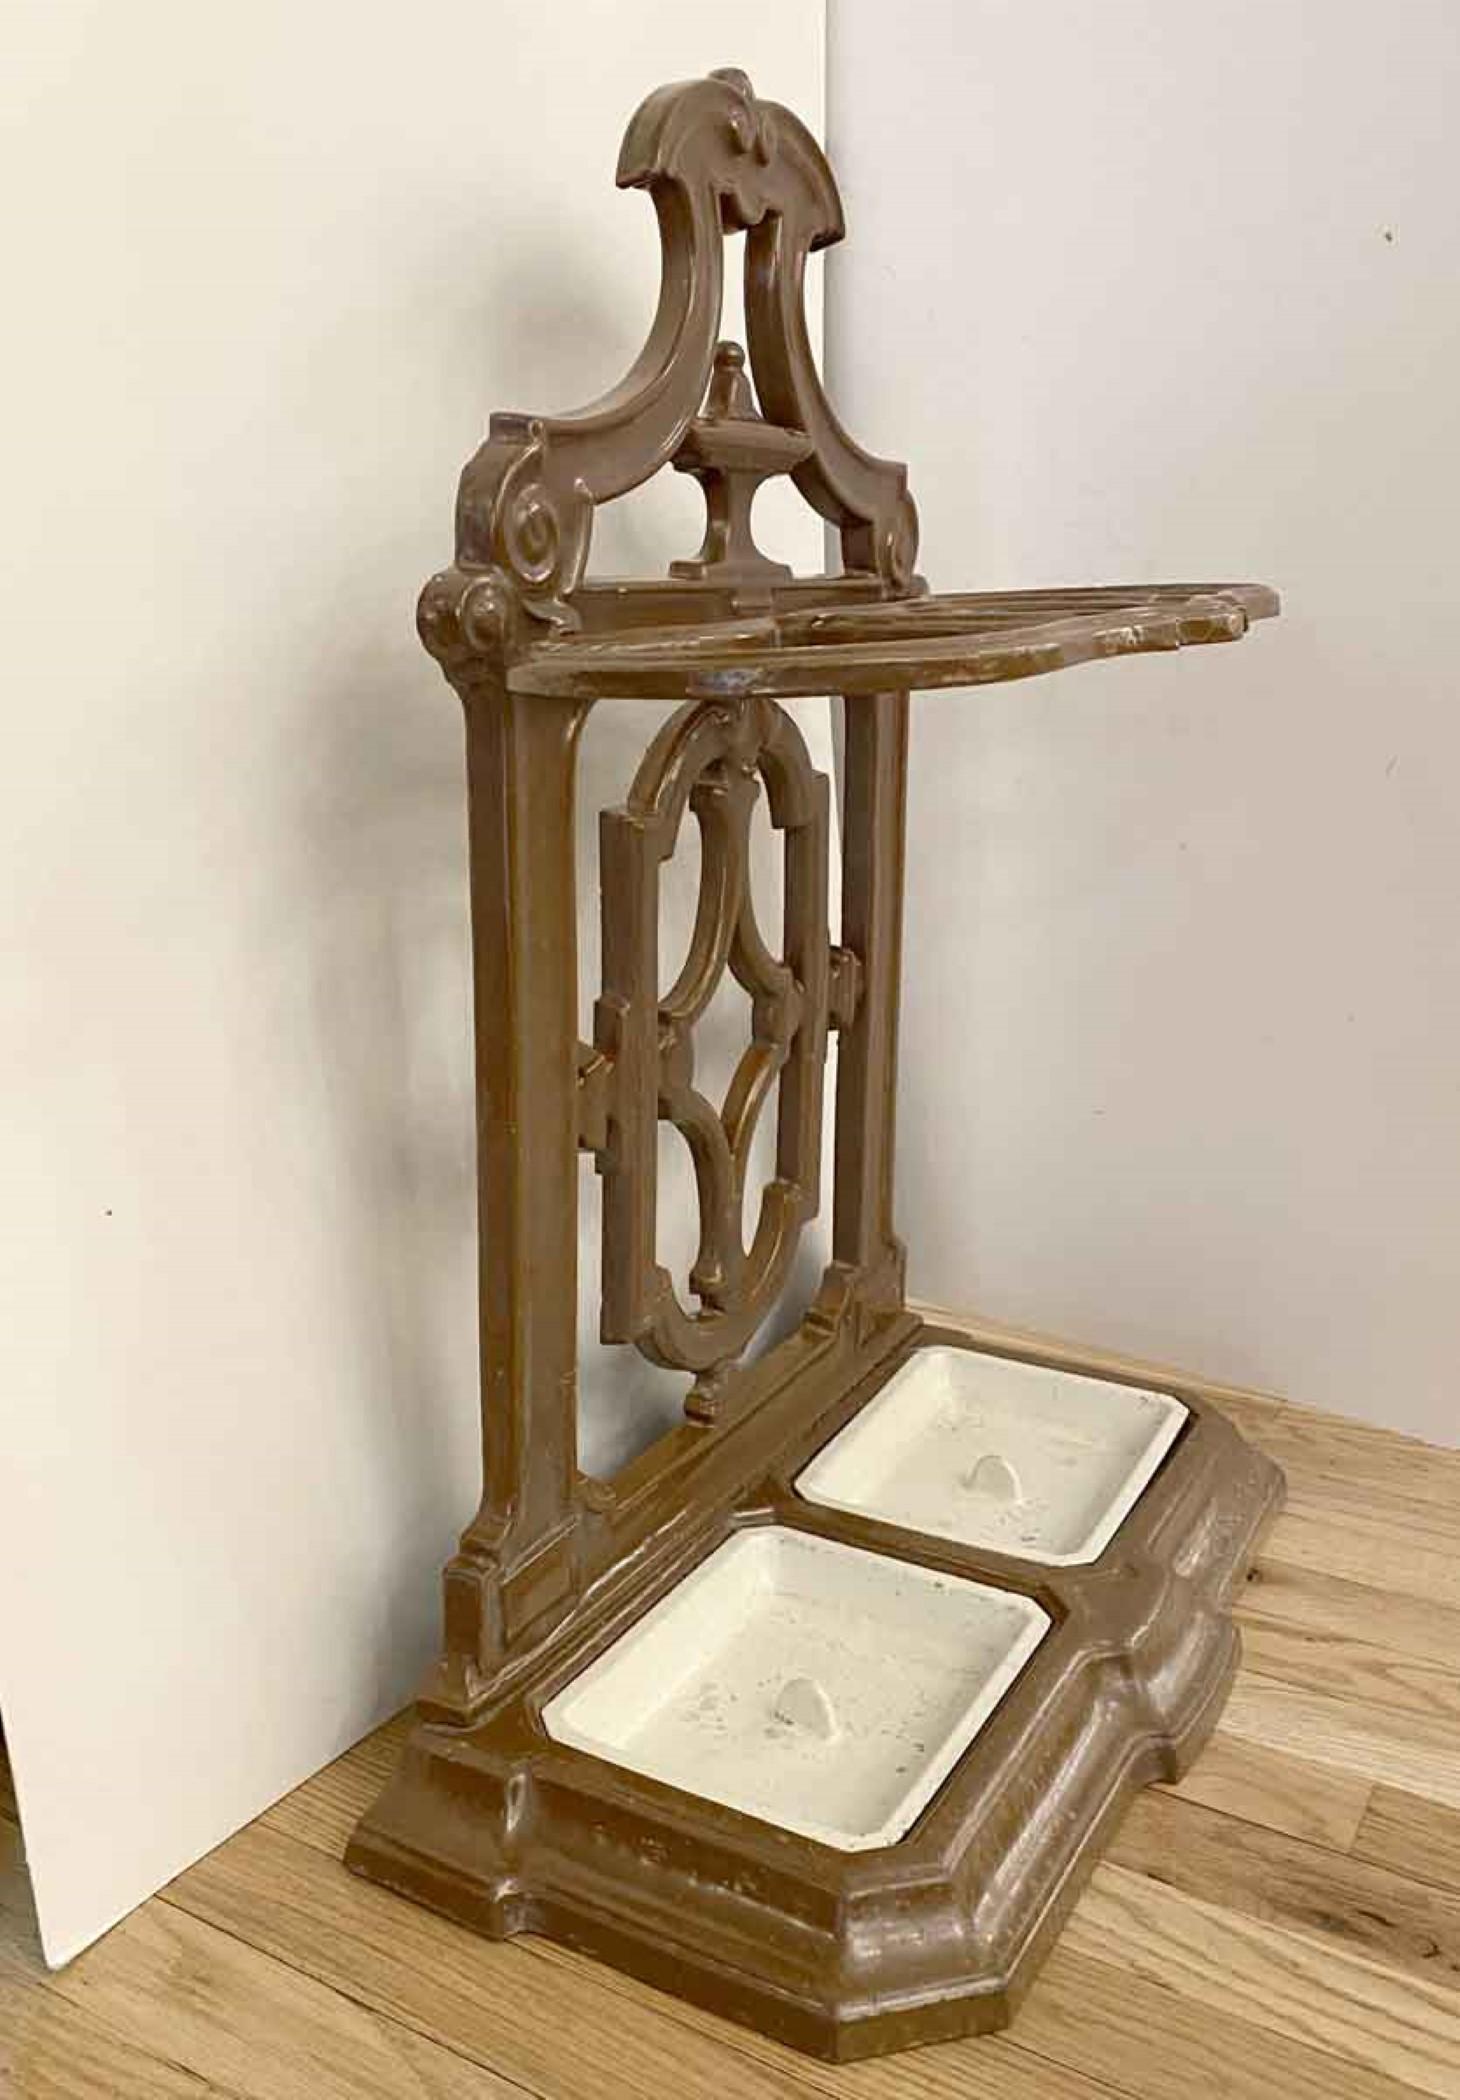 This 1940s ornate umbrella stand is well designed for wet umbrellas. It is a sturdy weight being made of enameled cast iron. The enamel is brown, and it has two white enamel trays to catch water drippings. There are three ring-like designs that will